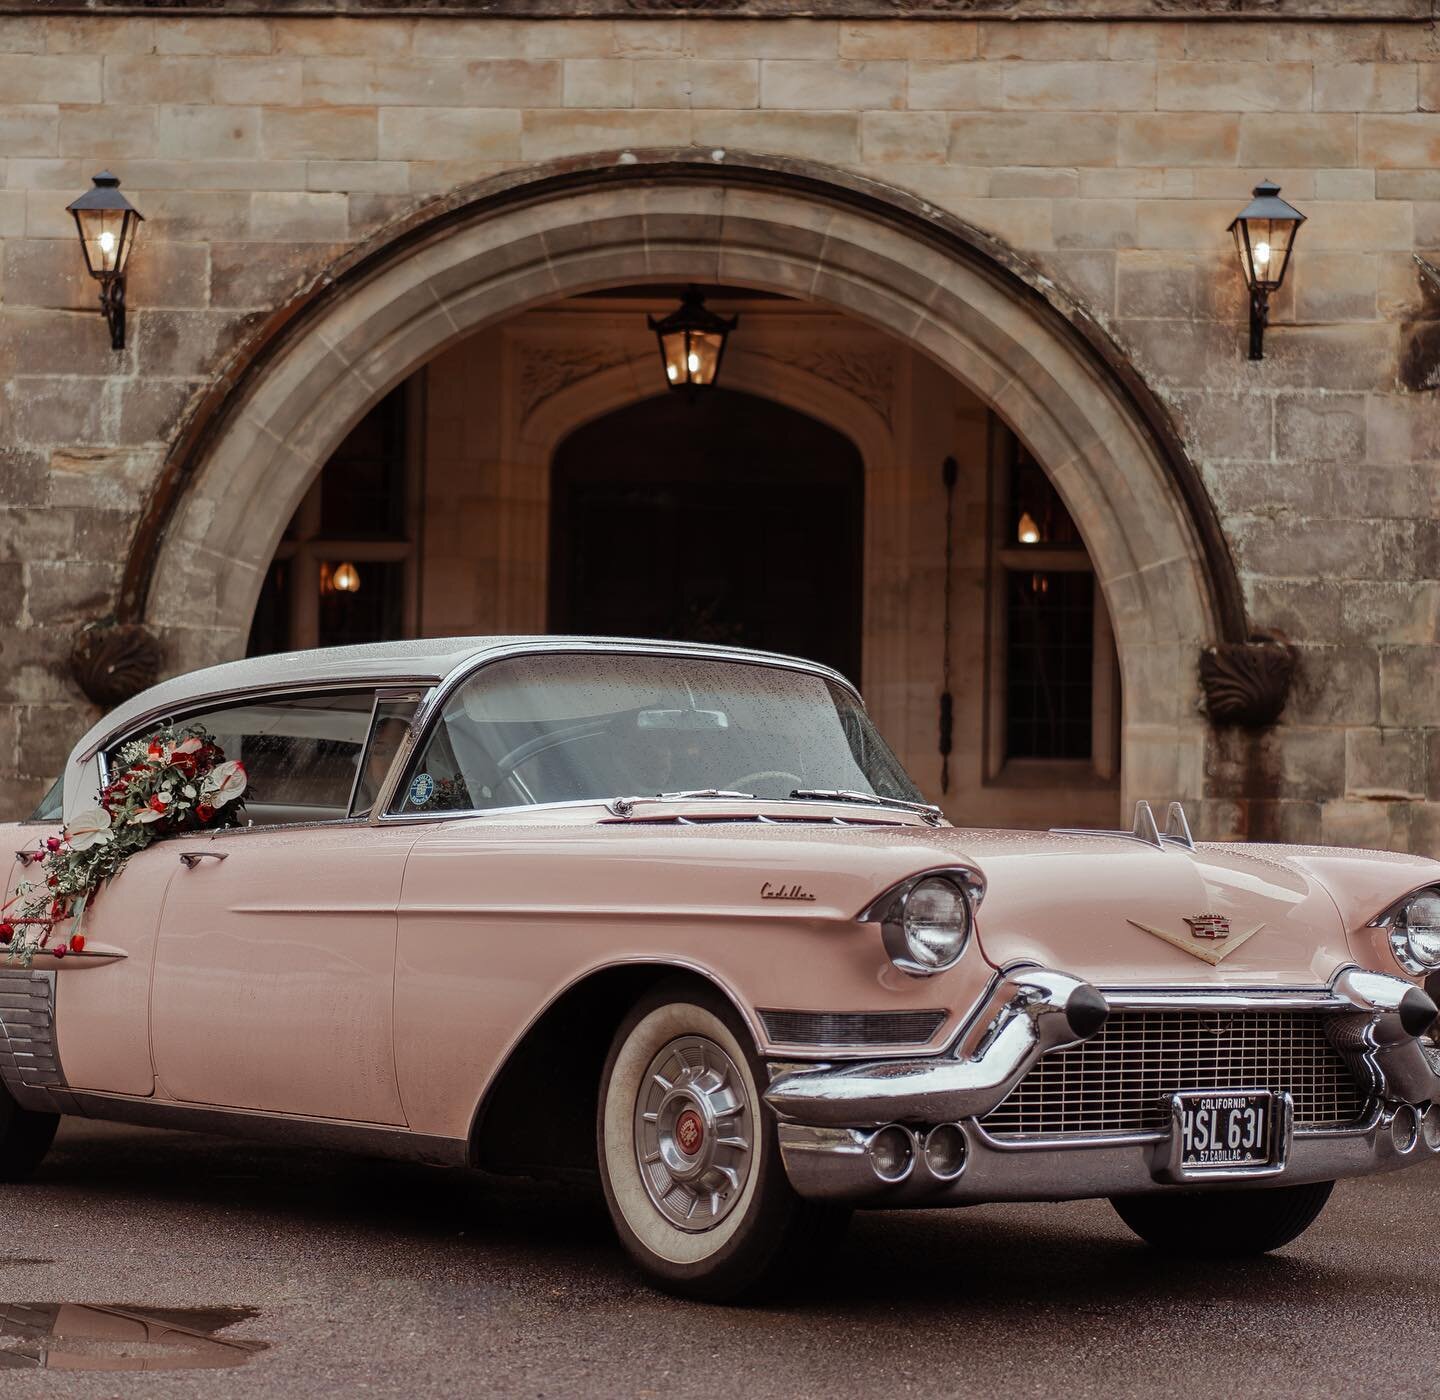 TRANSPORT // Is there anything more fun than a pink Cadillac?! 

#balcombeplace #venue #westsussex

Photoshoot:

Venue: @balcombe.place
Concept &amp; Photographer: @imogenevephotography
Concept &amp; Makeup: @belledenmua
Planner, Coordinator &amp; St